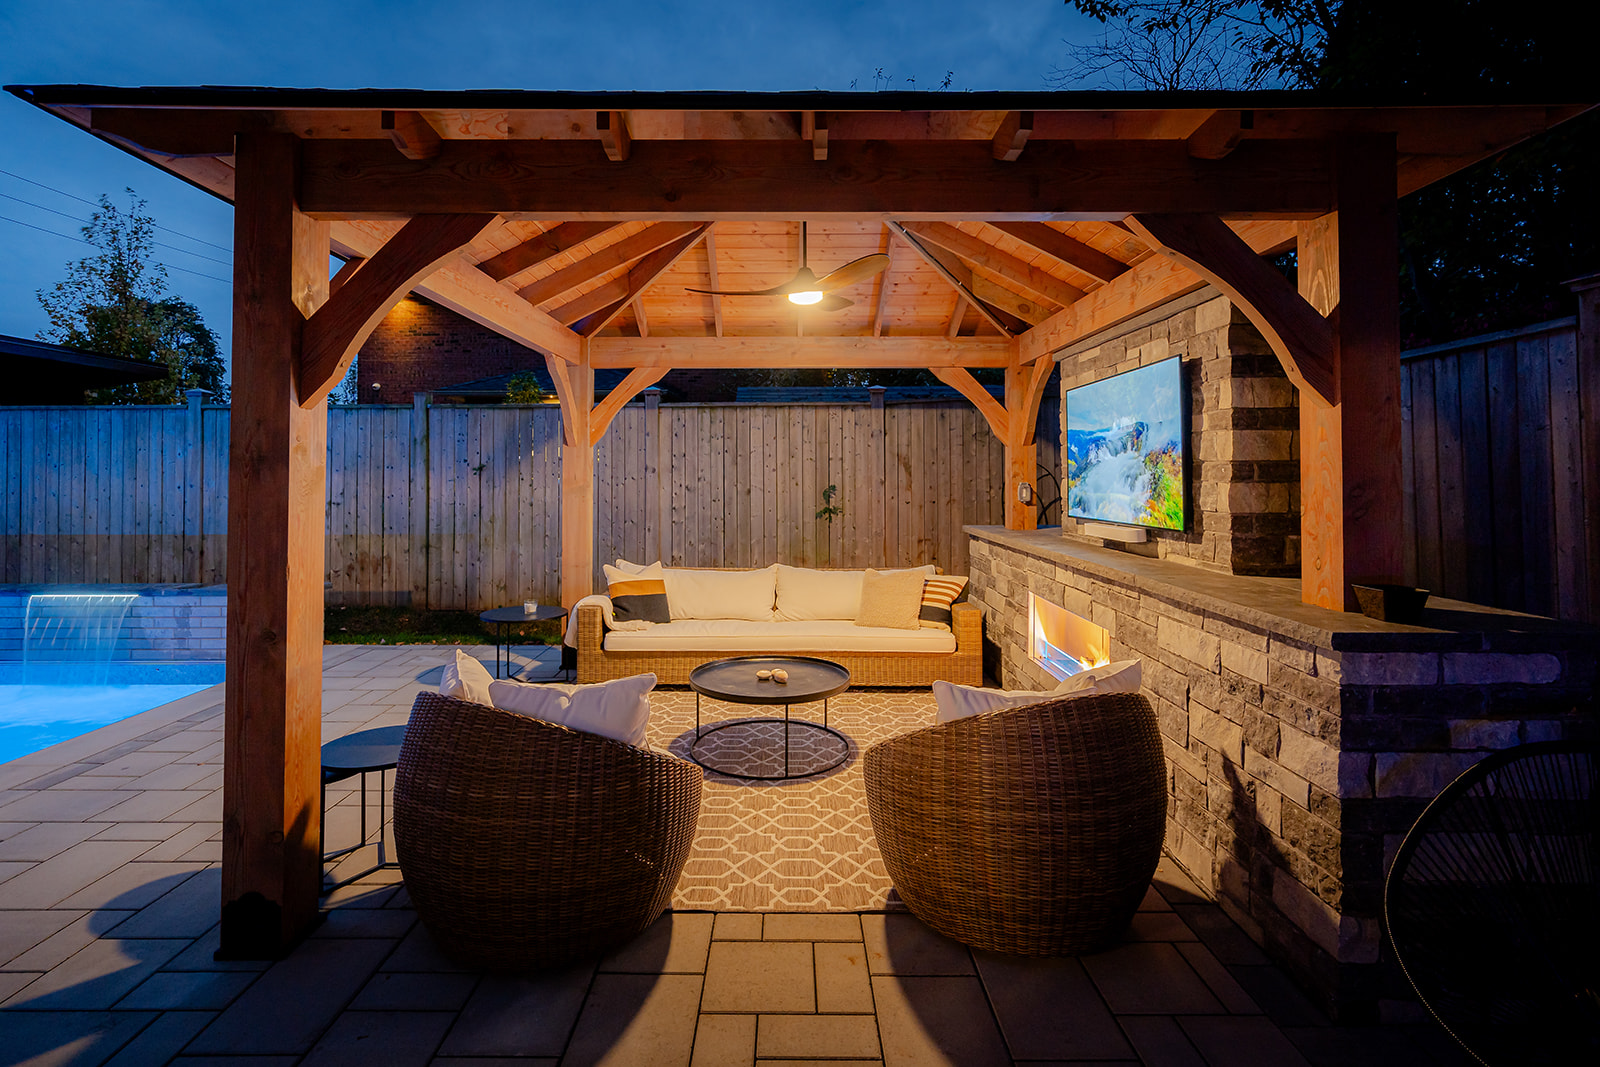 An outdoor patio set with a pool on the left.